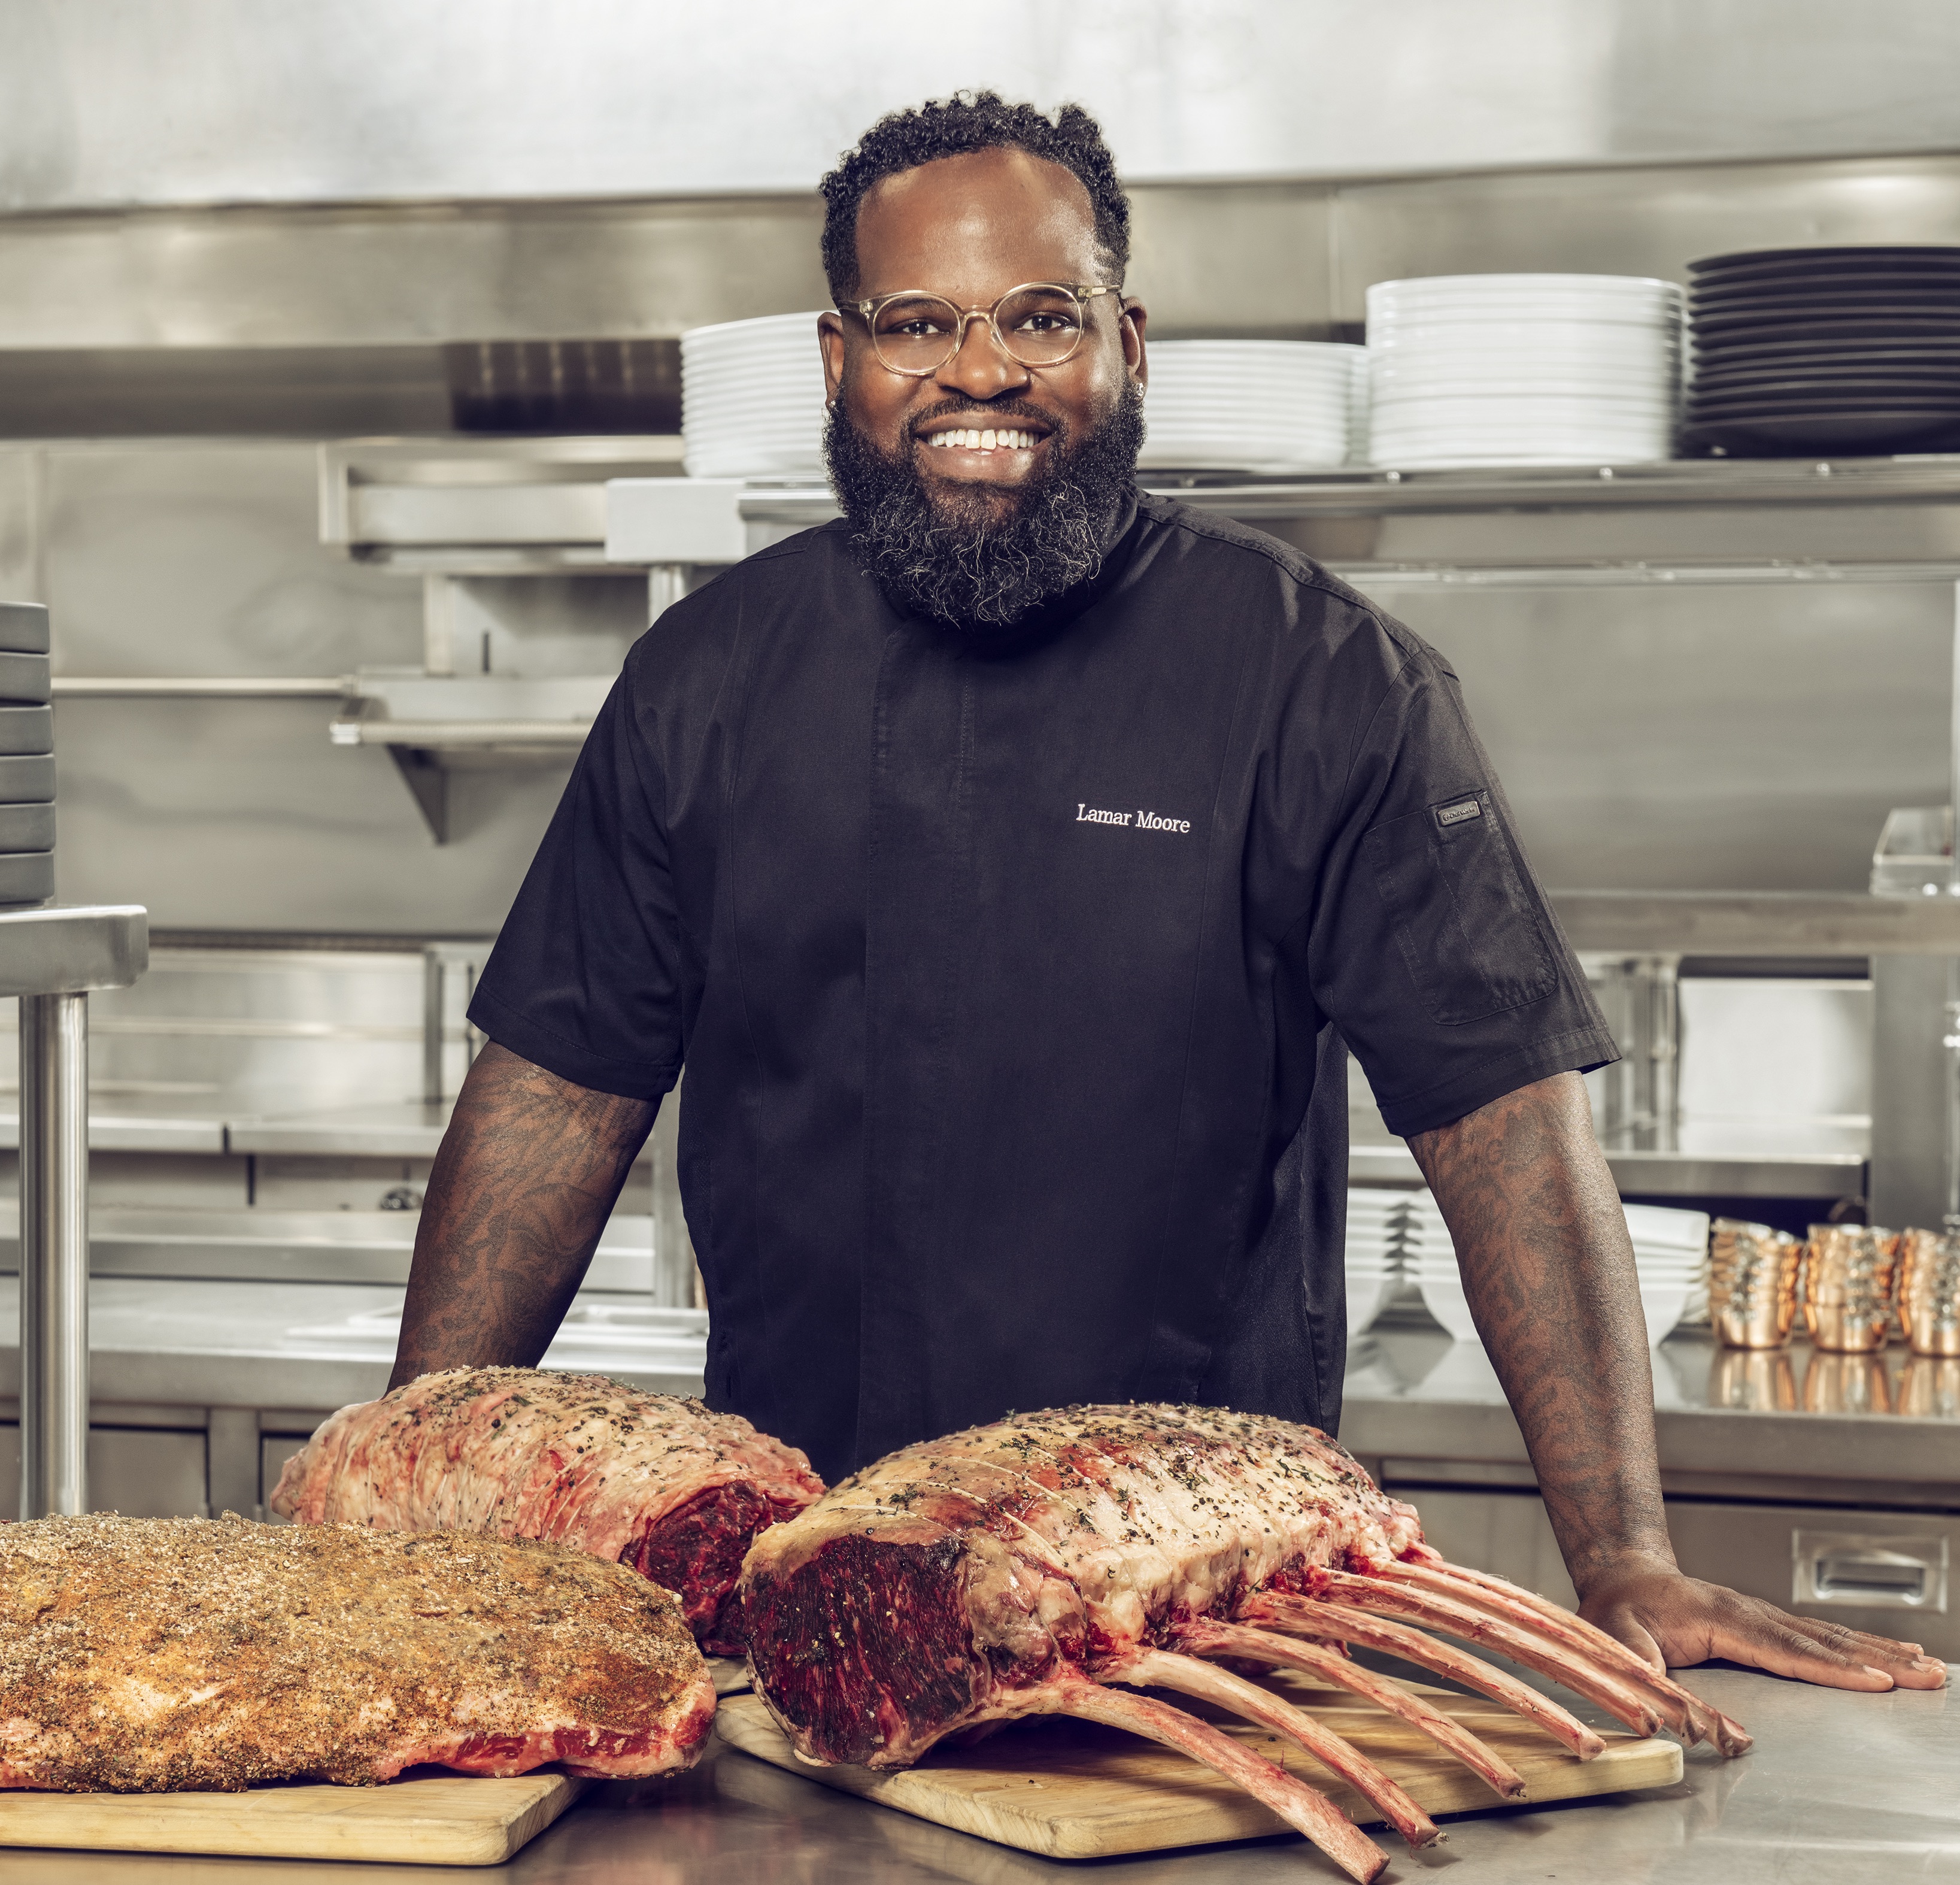 A chef stands in front of meat in a kitchen